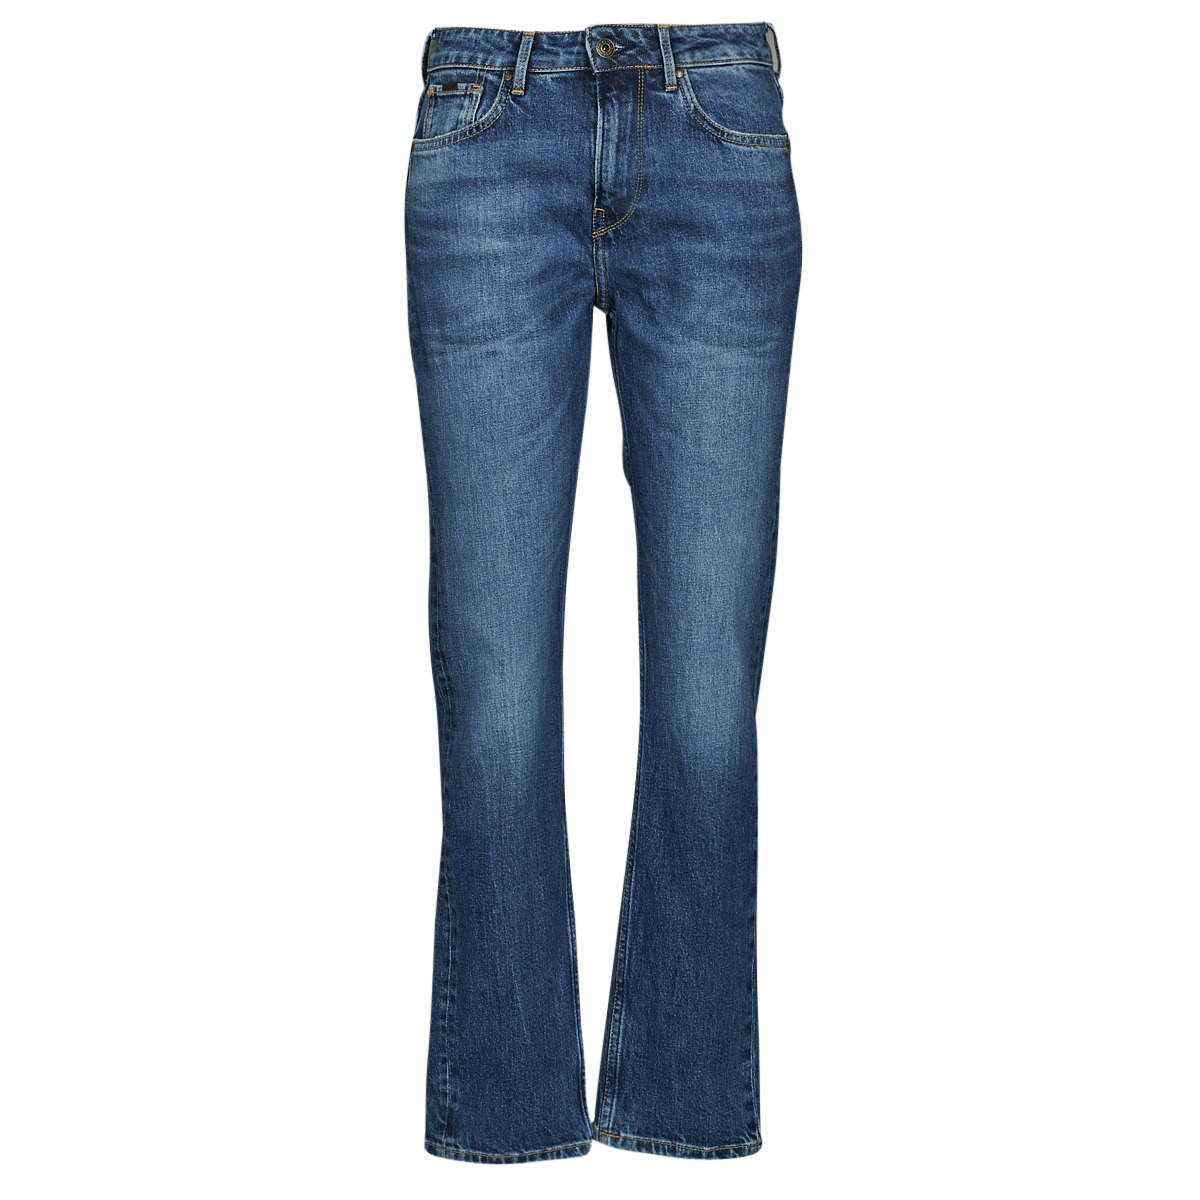 Pepe jeans  Tζιν σε ίσια γραμή Pepe jeans MARY